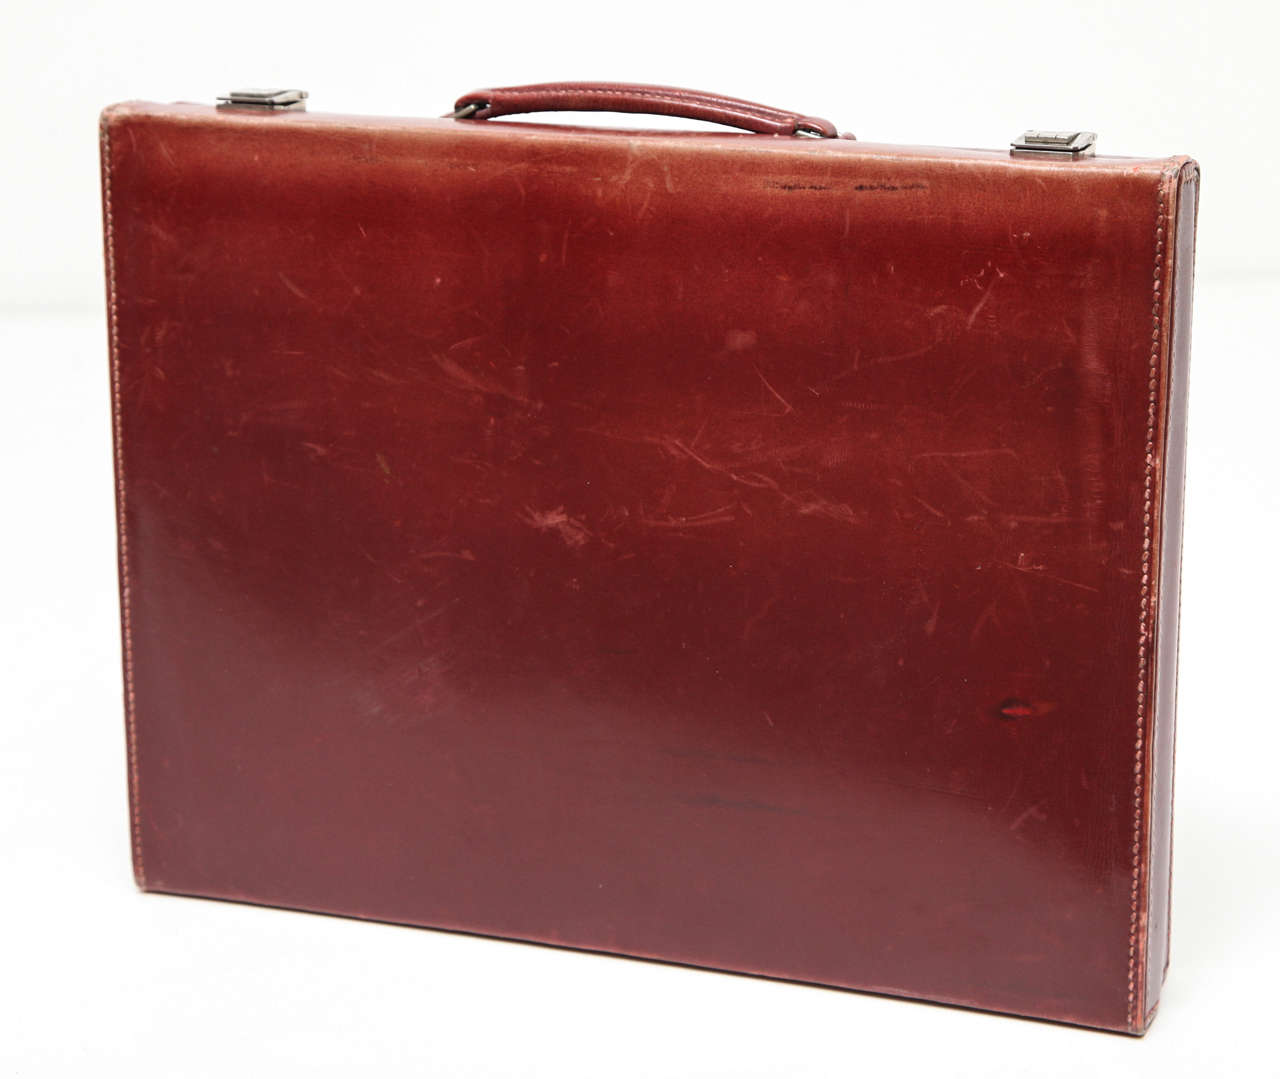 Hermès Leather Deco Travel Case with Fittings, Stamped on all Pieces